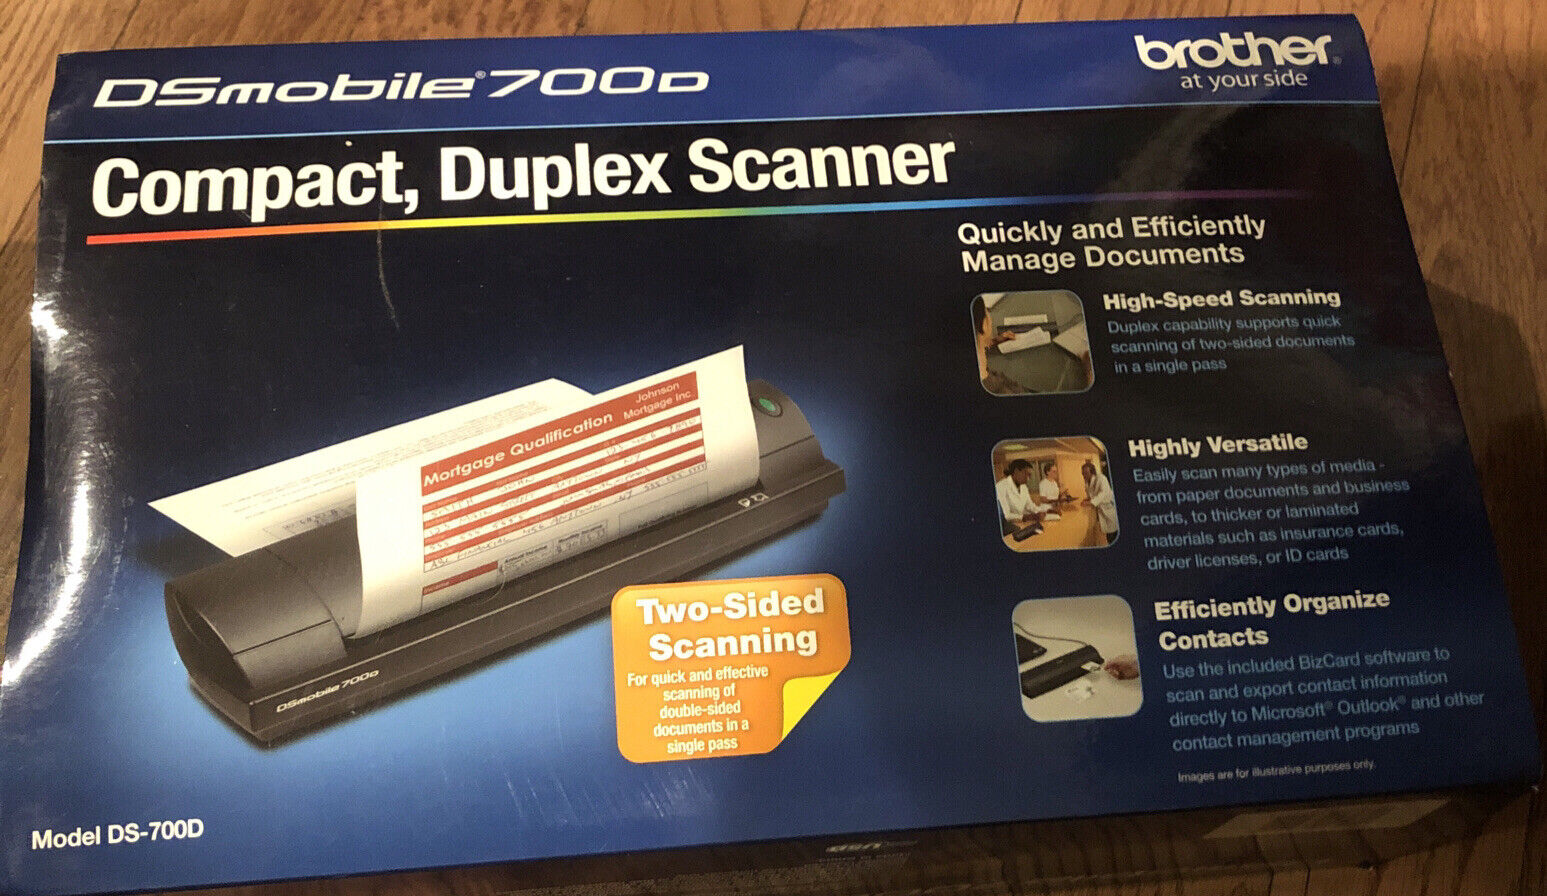 Brother DSmobile 700D Compact, Duplex Scanner, Two Sided Scanning